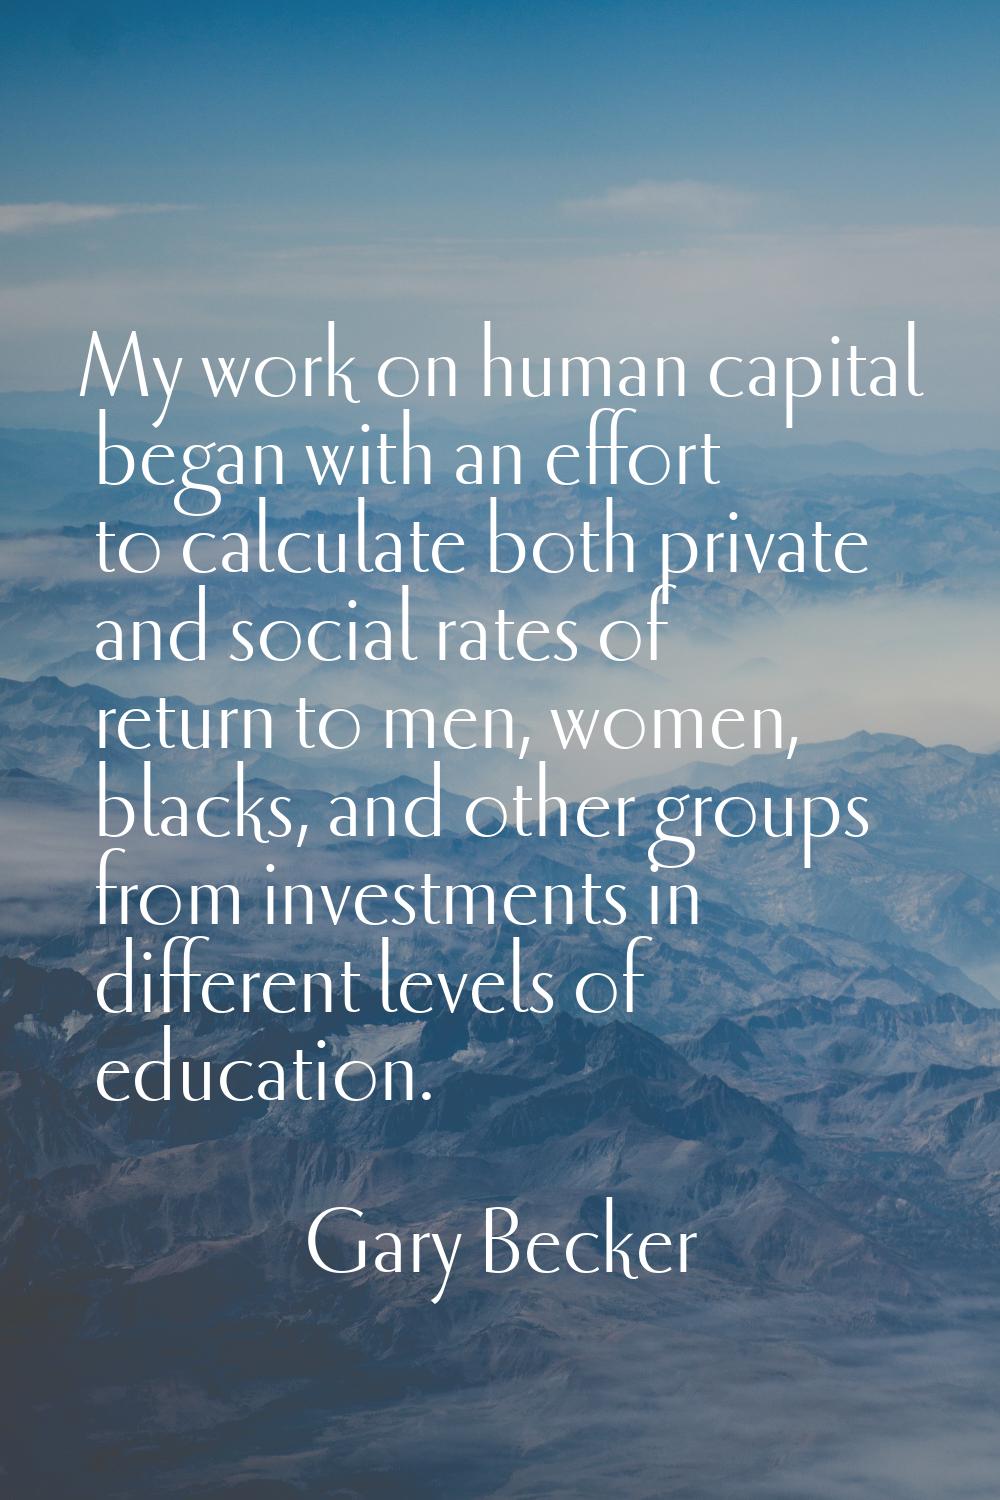 My work on human capital began with an effort to calculate both private and social rates of return 